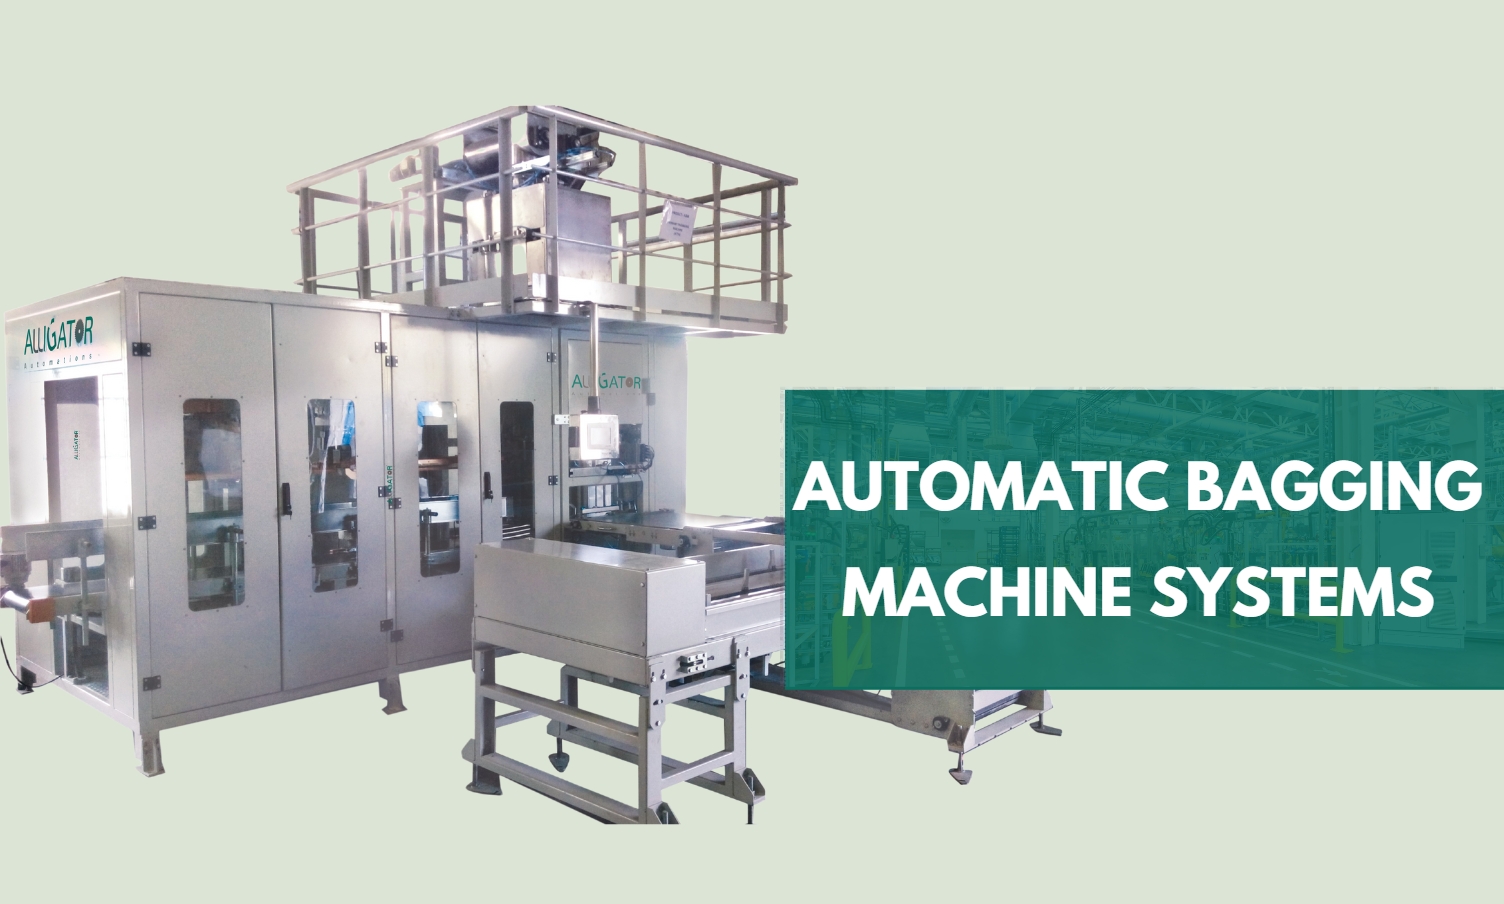 automatic-bagging-machine-bag-filling-automation-image